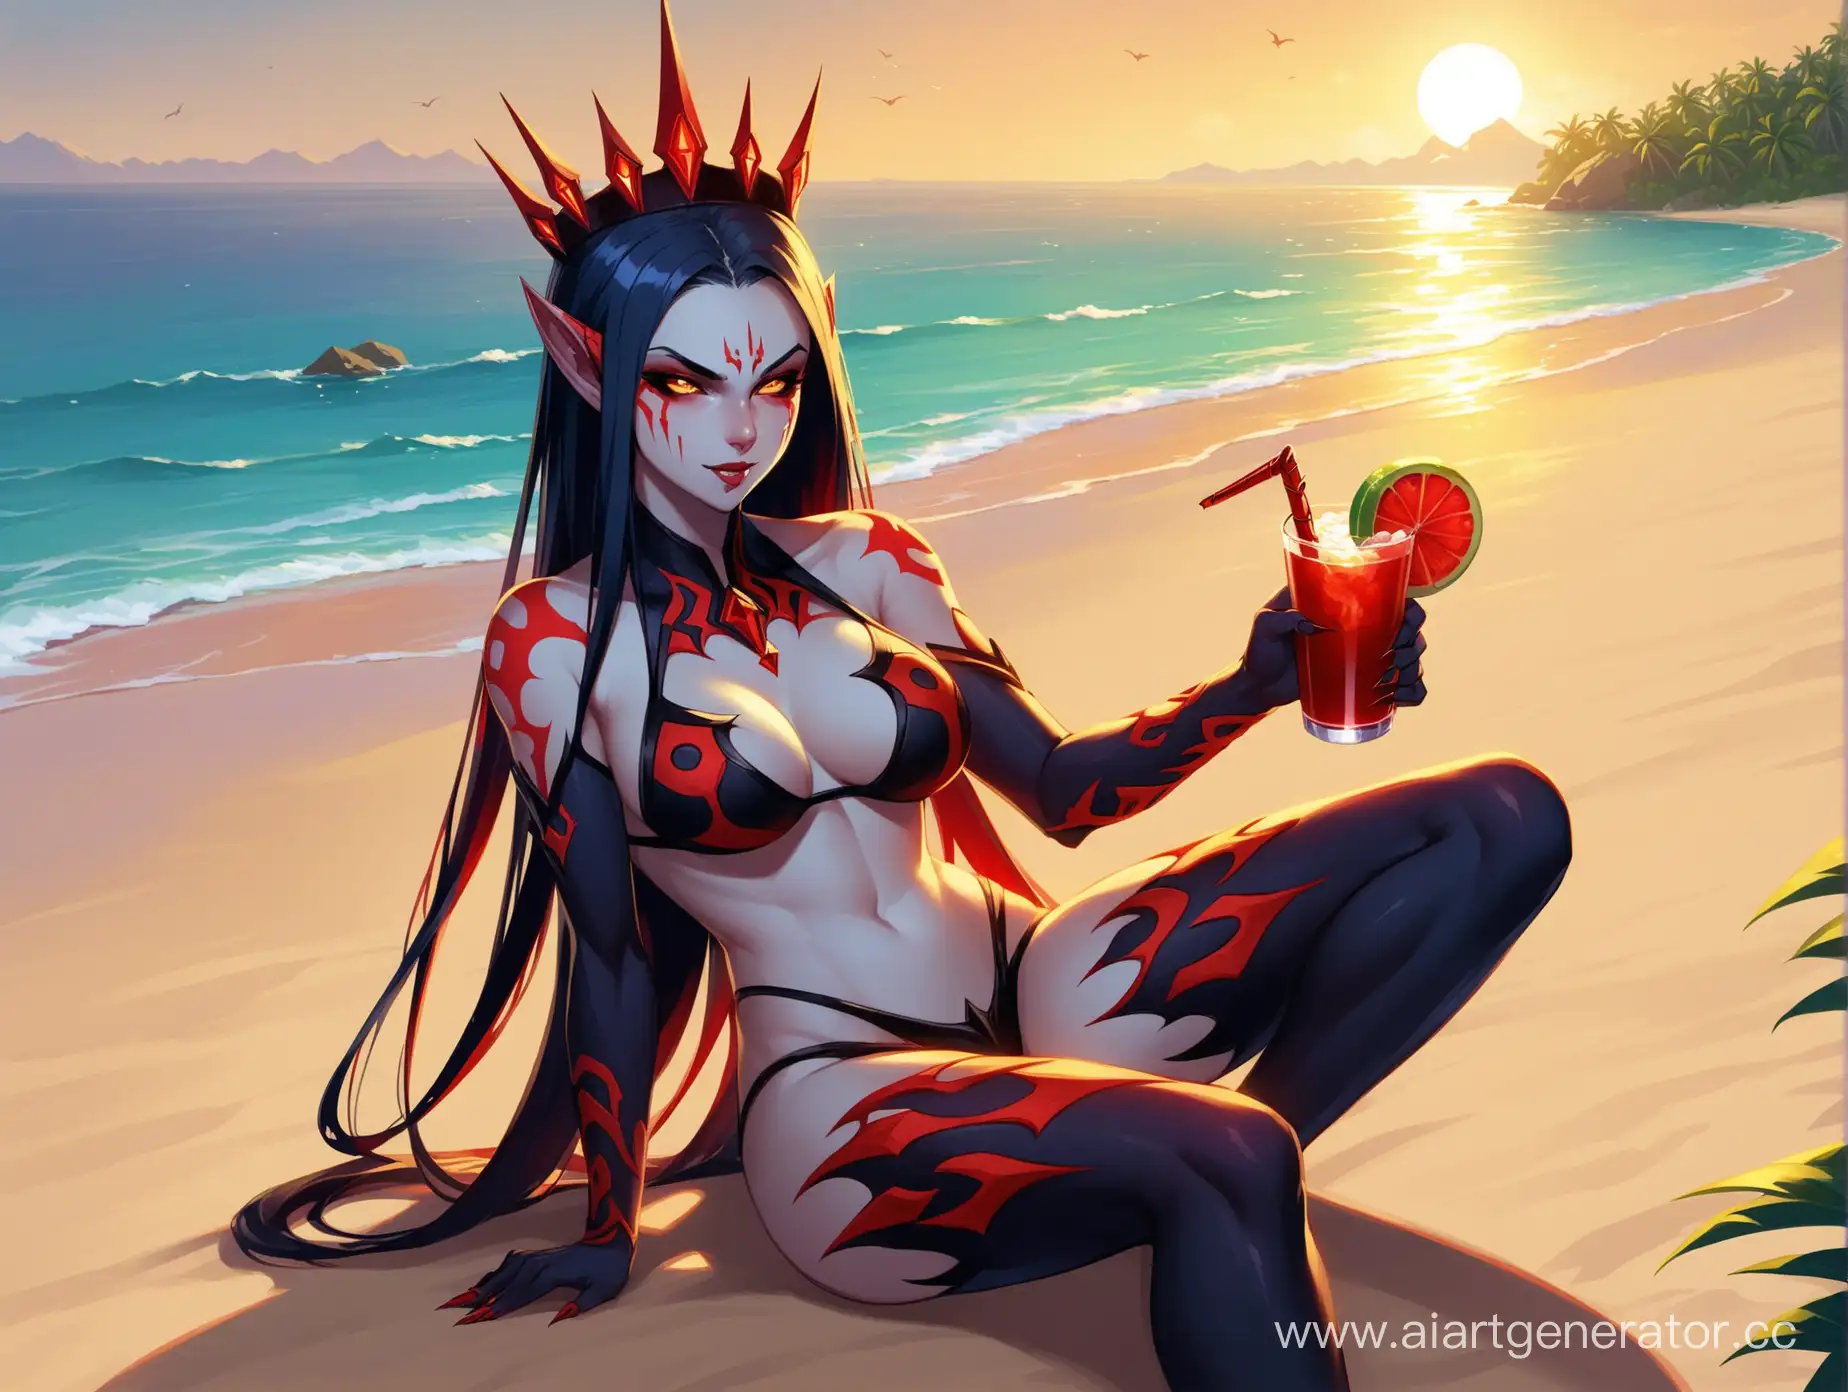 Queen of Pain from Dota 2 chilling on the beach with a drink, slim body